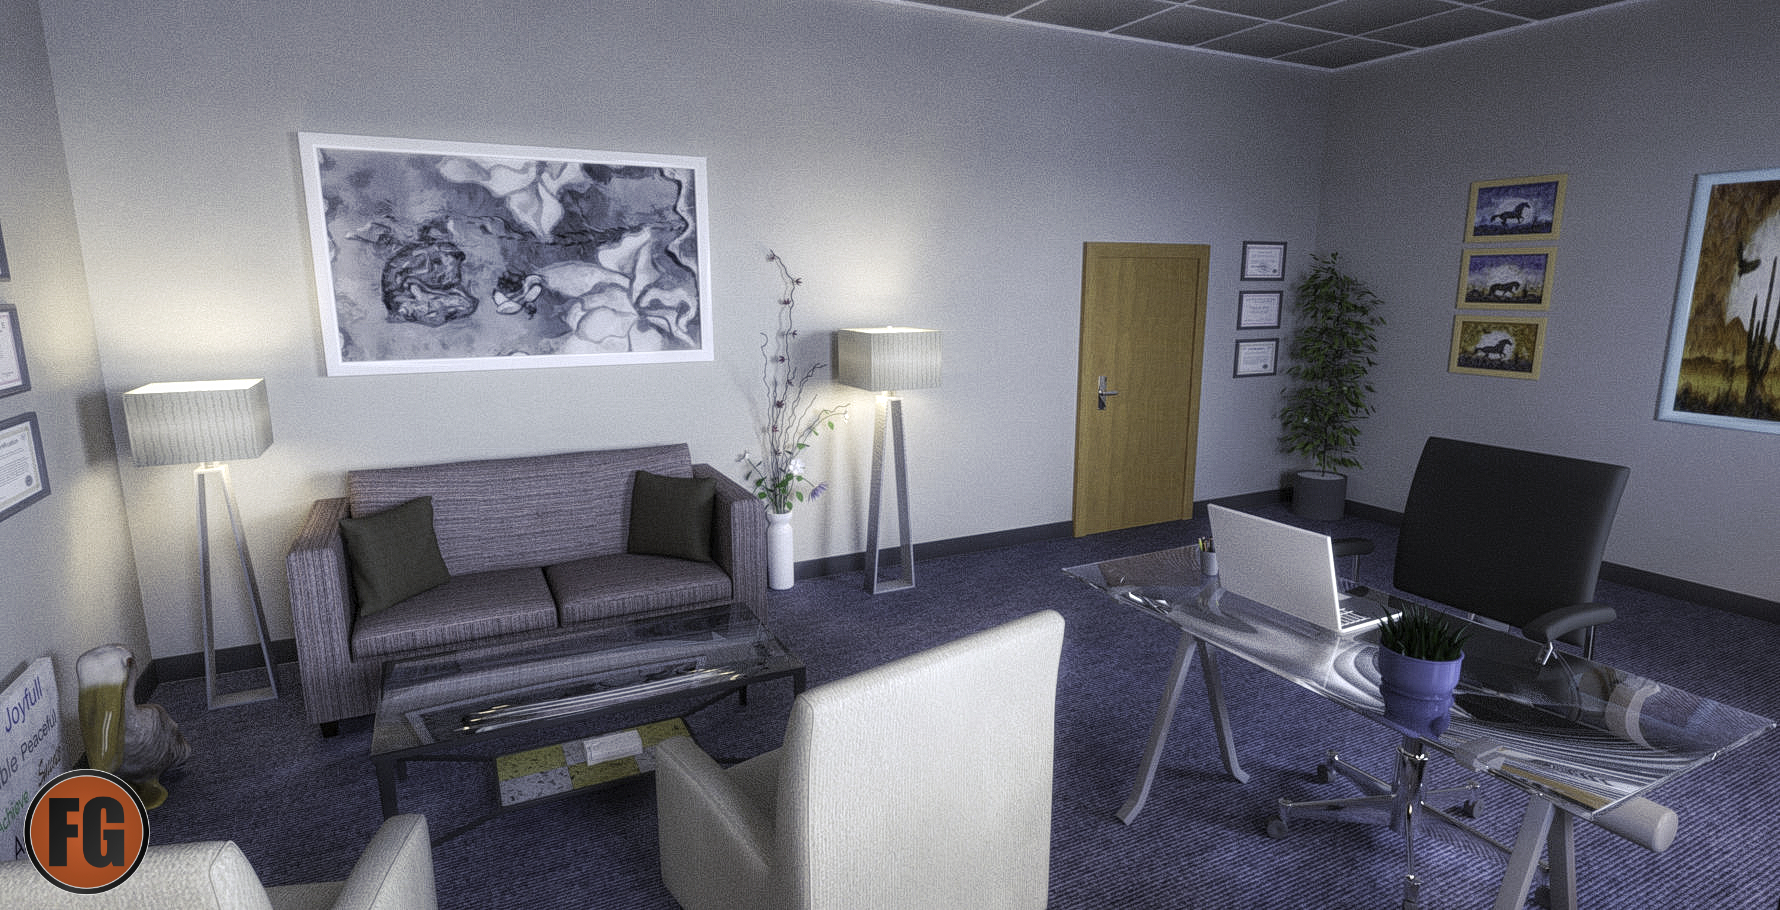 FG Therapy Room by: Fugazi1968, 3D Models by Daz 3D